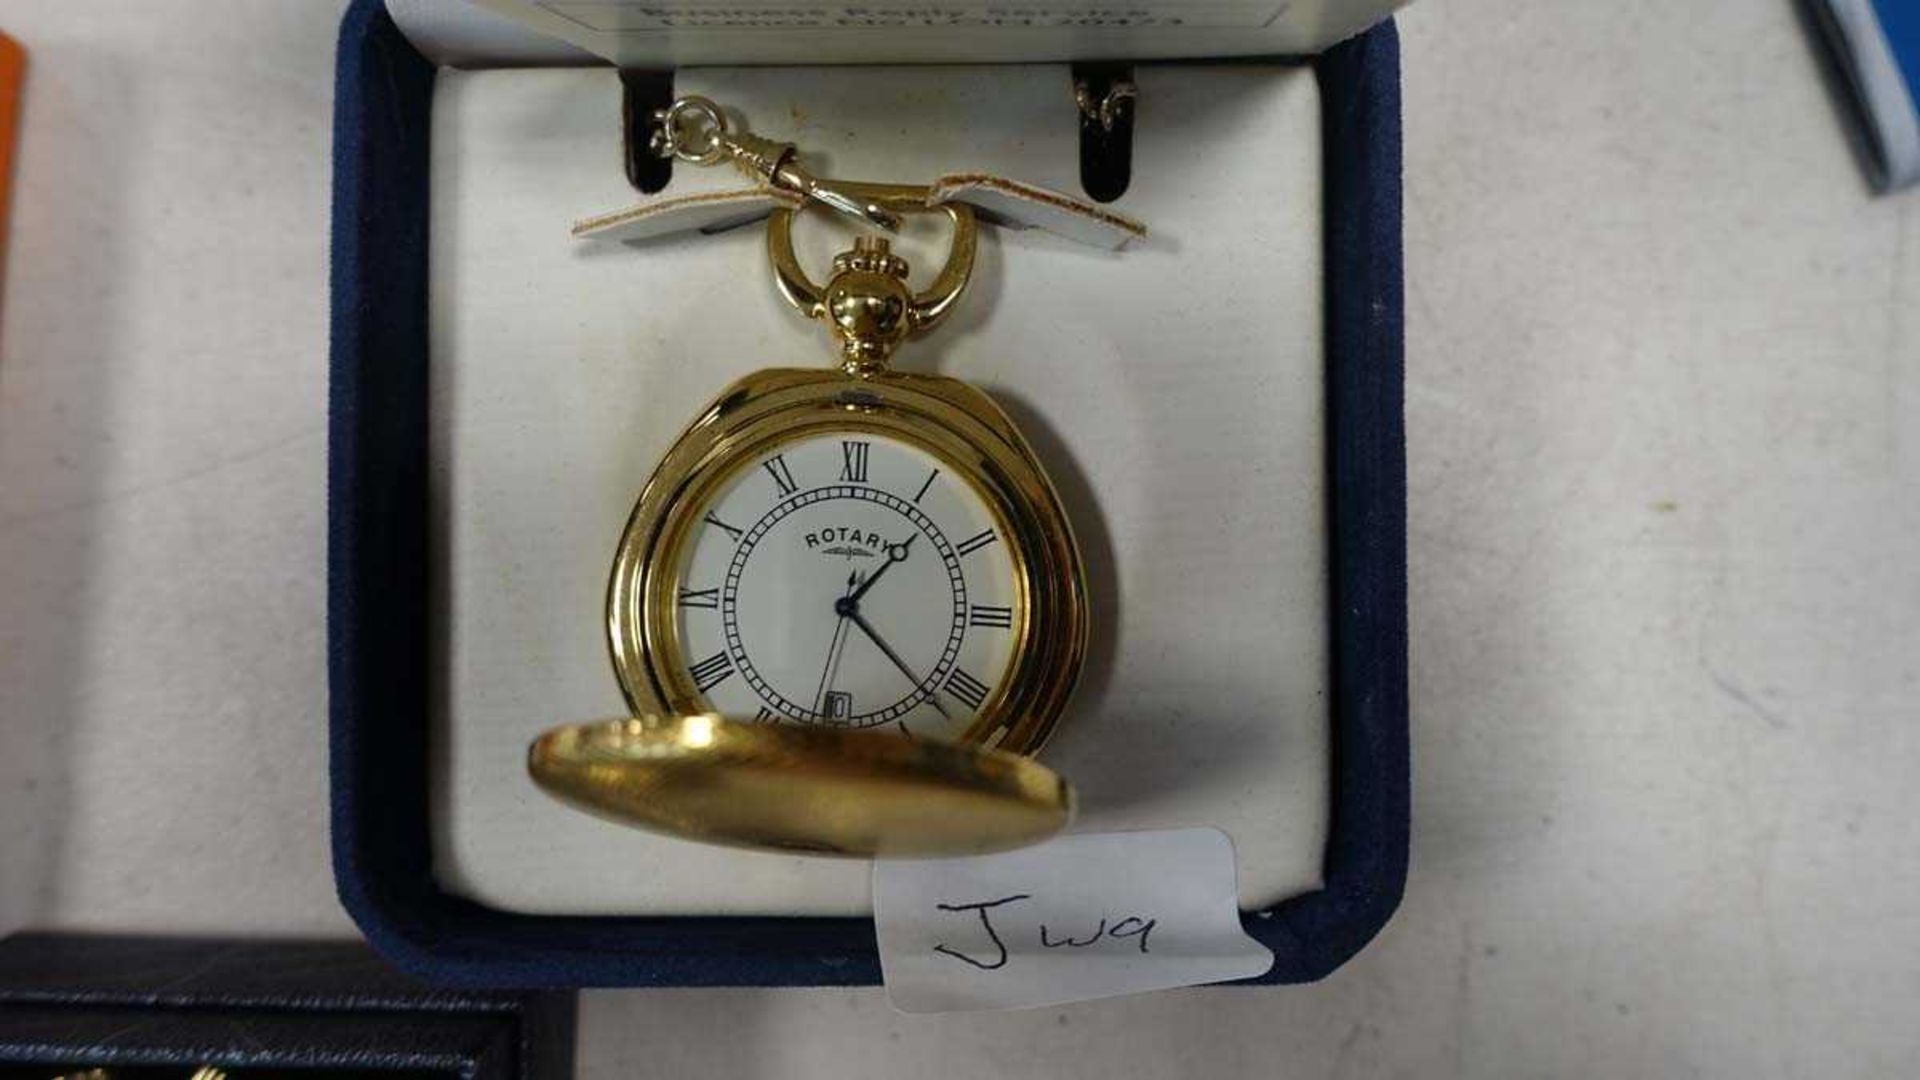 Rotary pocket watch with Smiths pendant watch and rotary yellow metal strap watch and case - Image 2 of 2